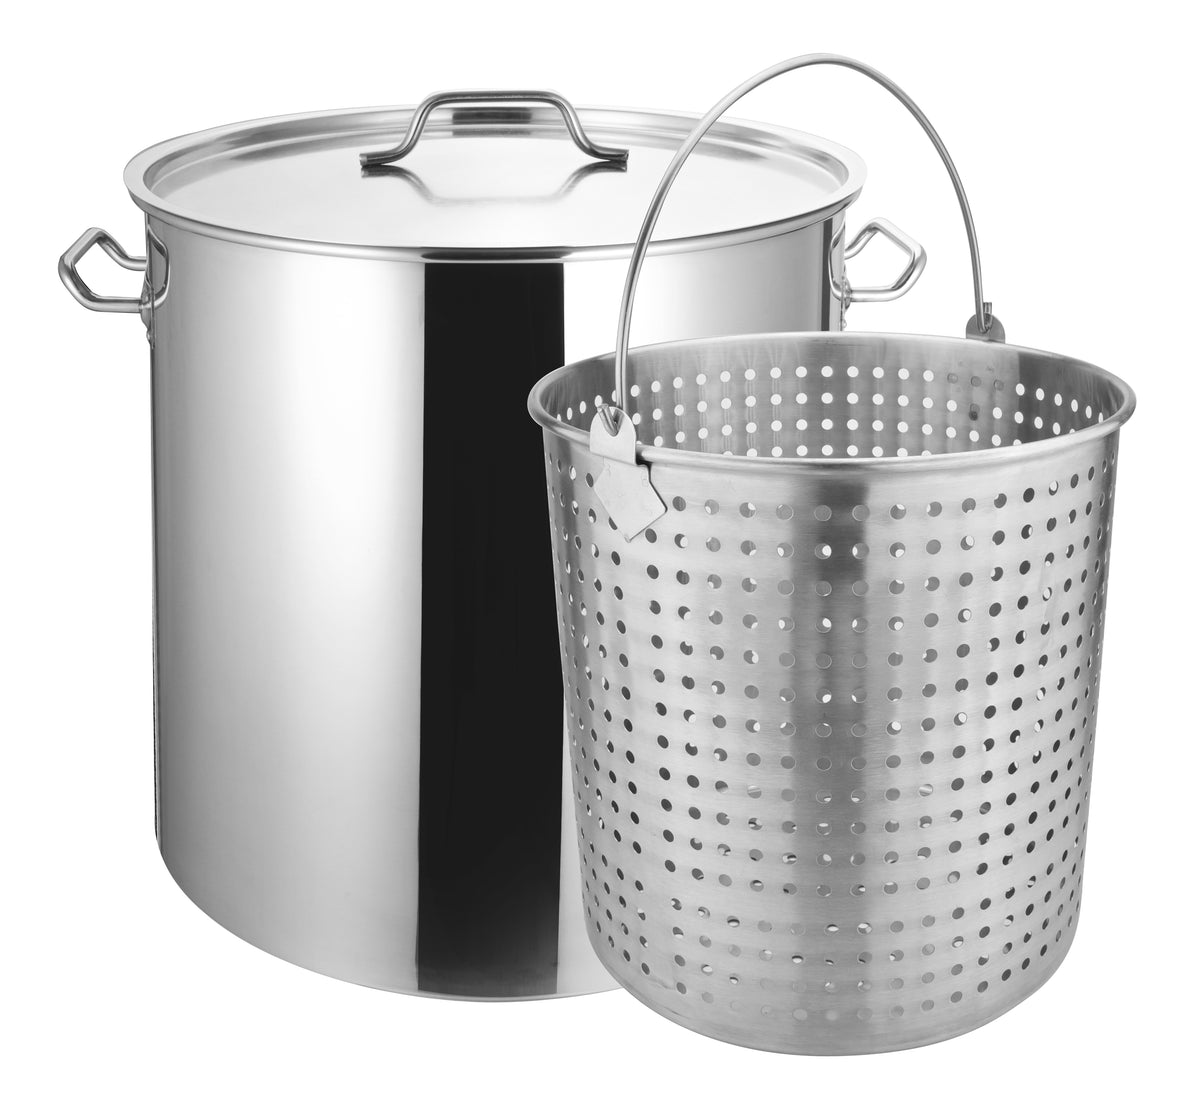 Bene Casa 100Qt Stainless Steel Boiling Pot with Strainer Basket and L